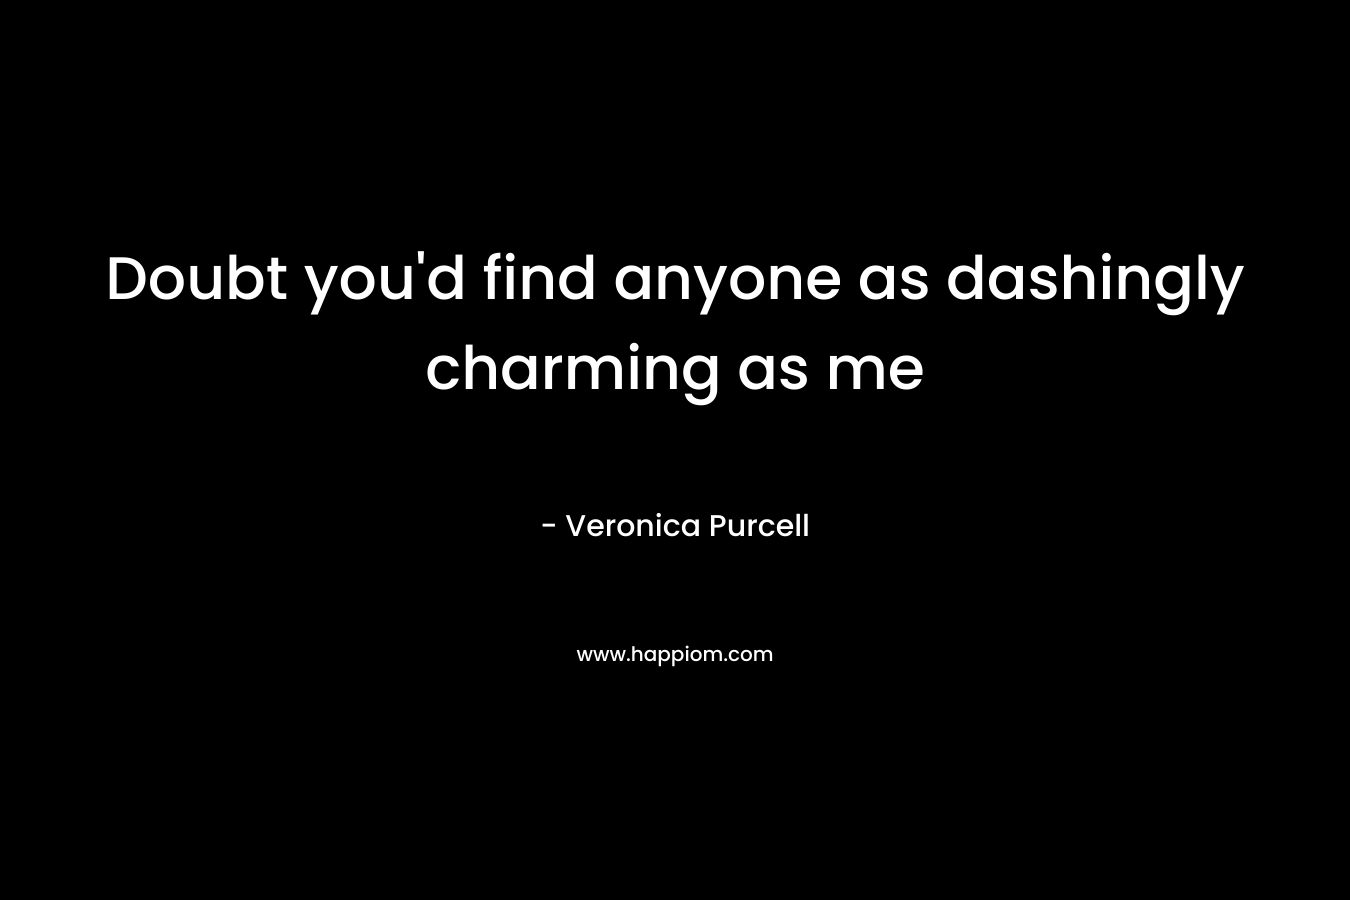 Doubt you'd find anyone as dashingly charming as me